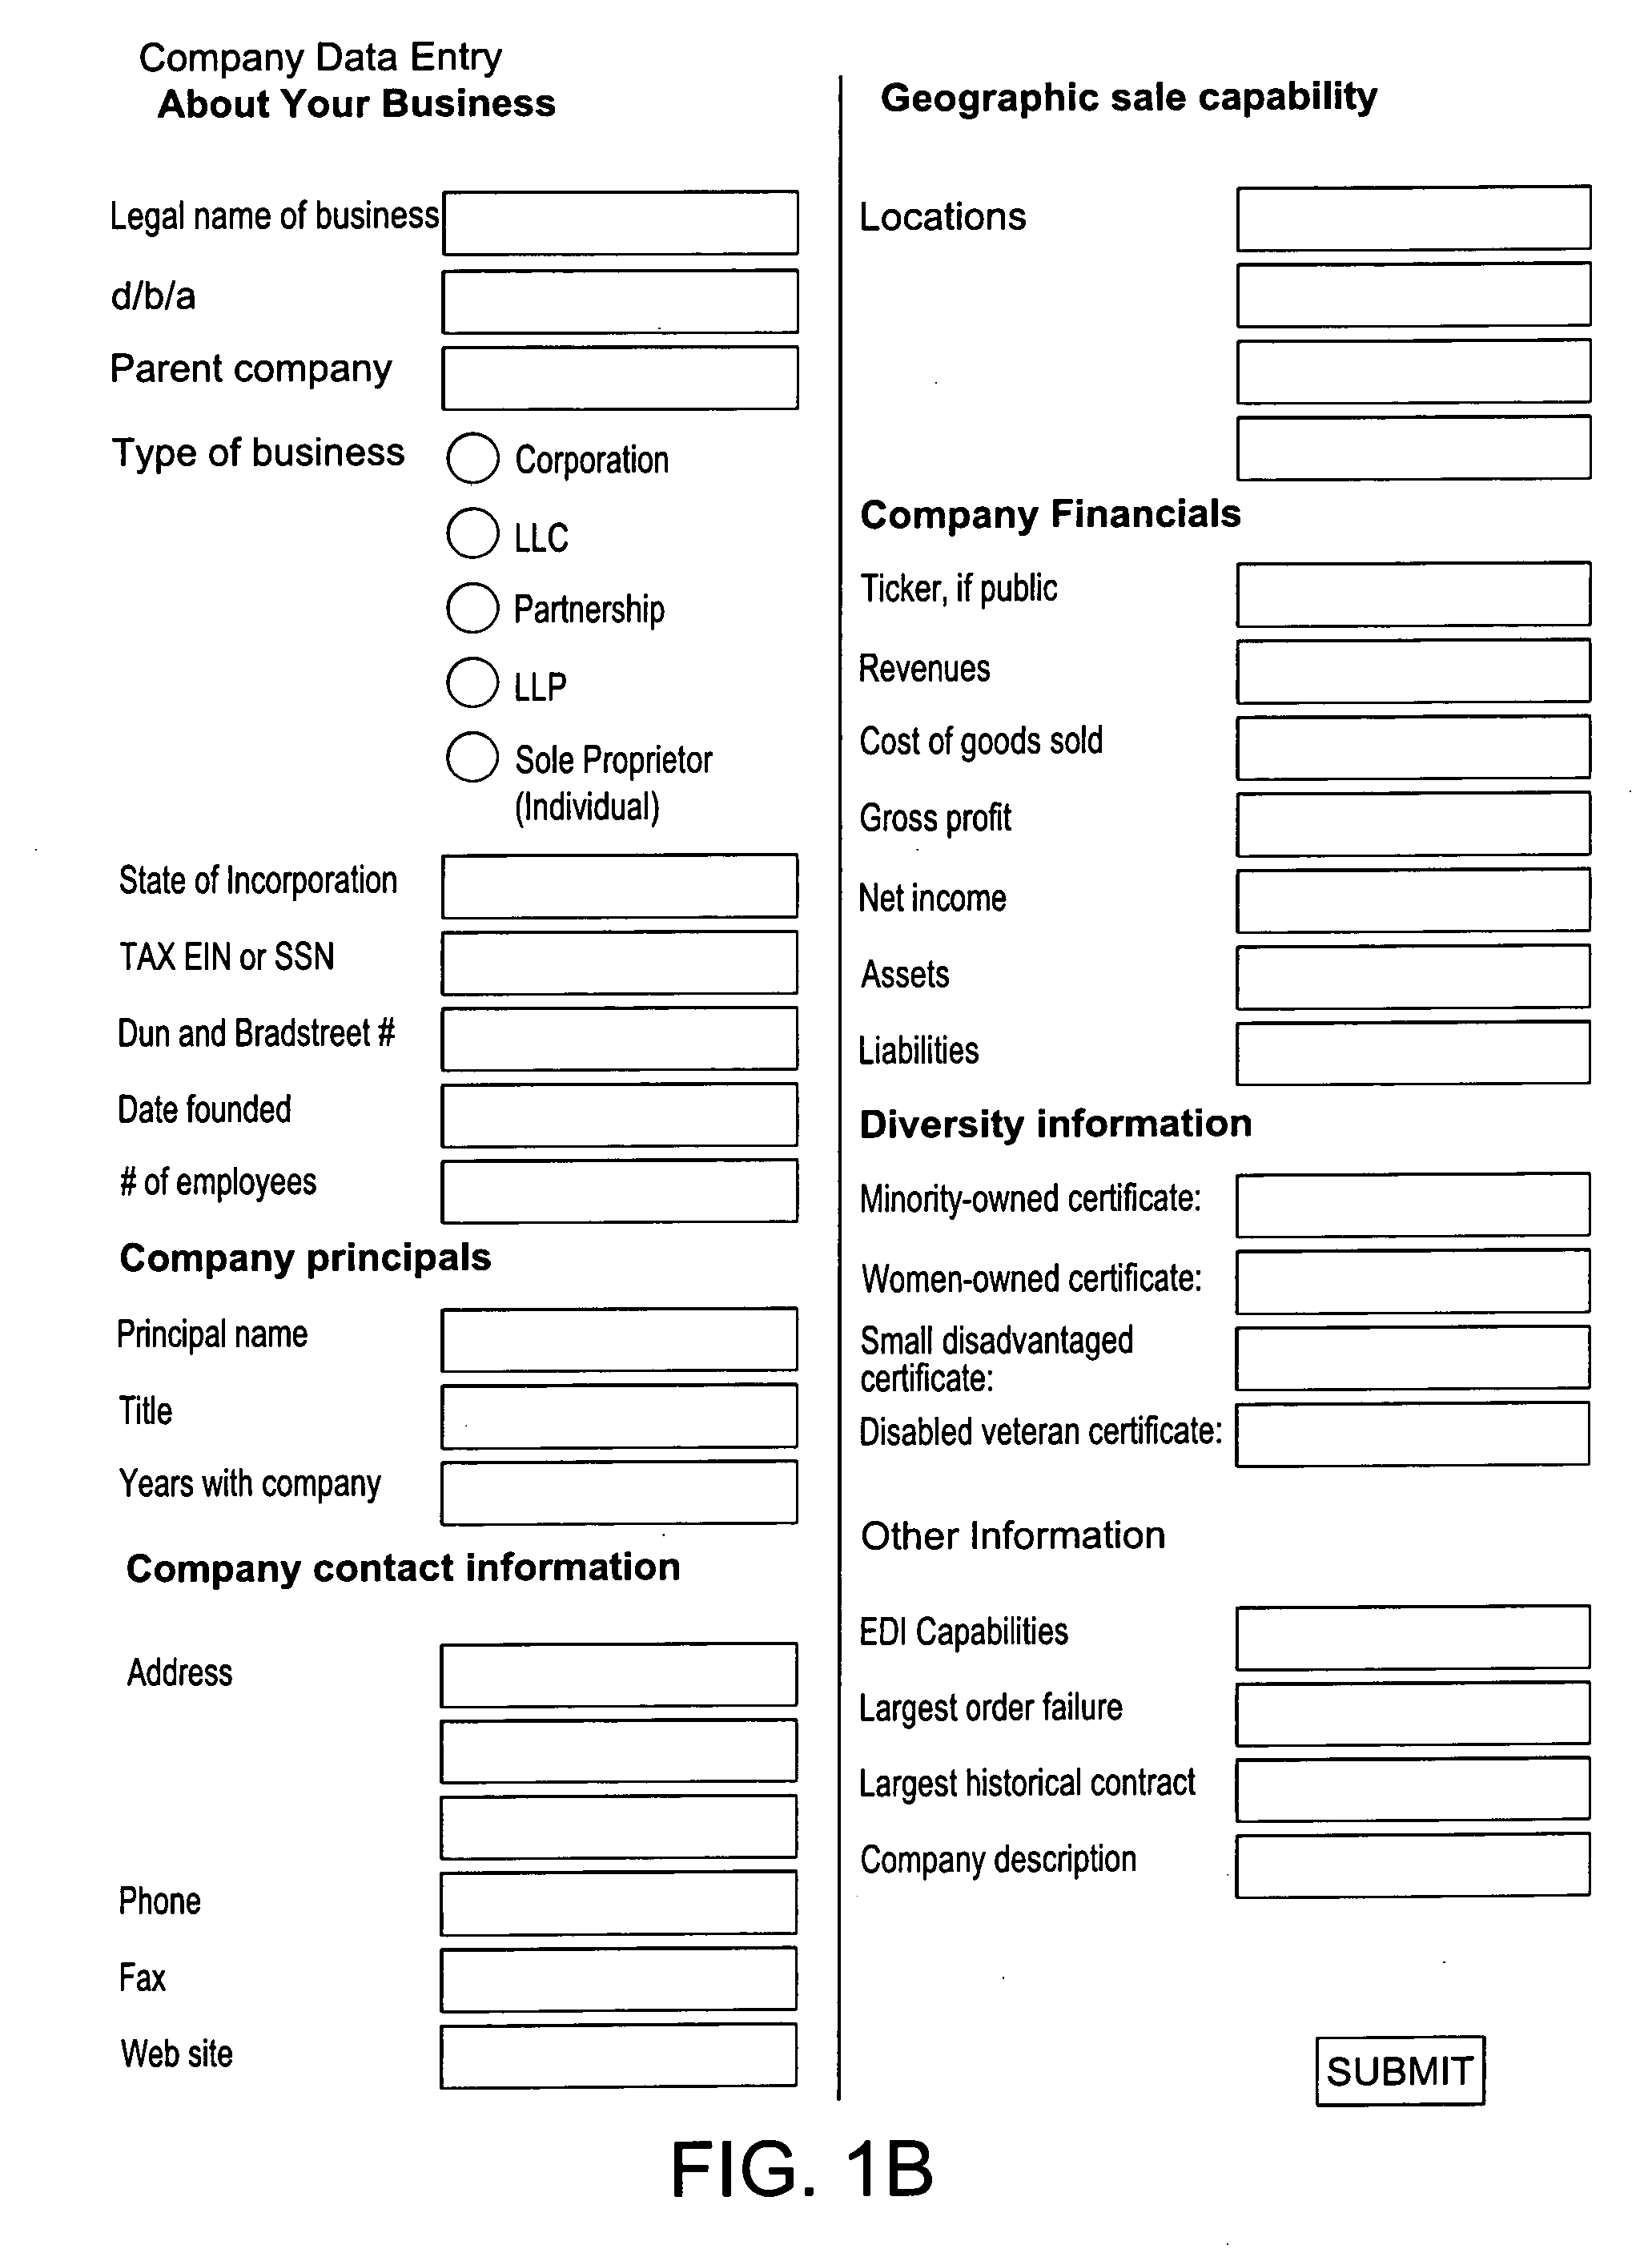 Method and system for registering, credentialing, rating, and/or cataloging businesses, organizations, and individuals on a communications network